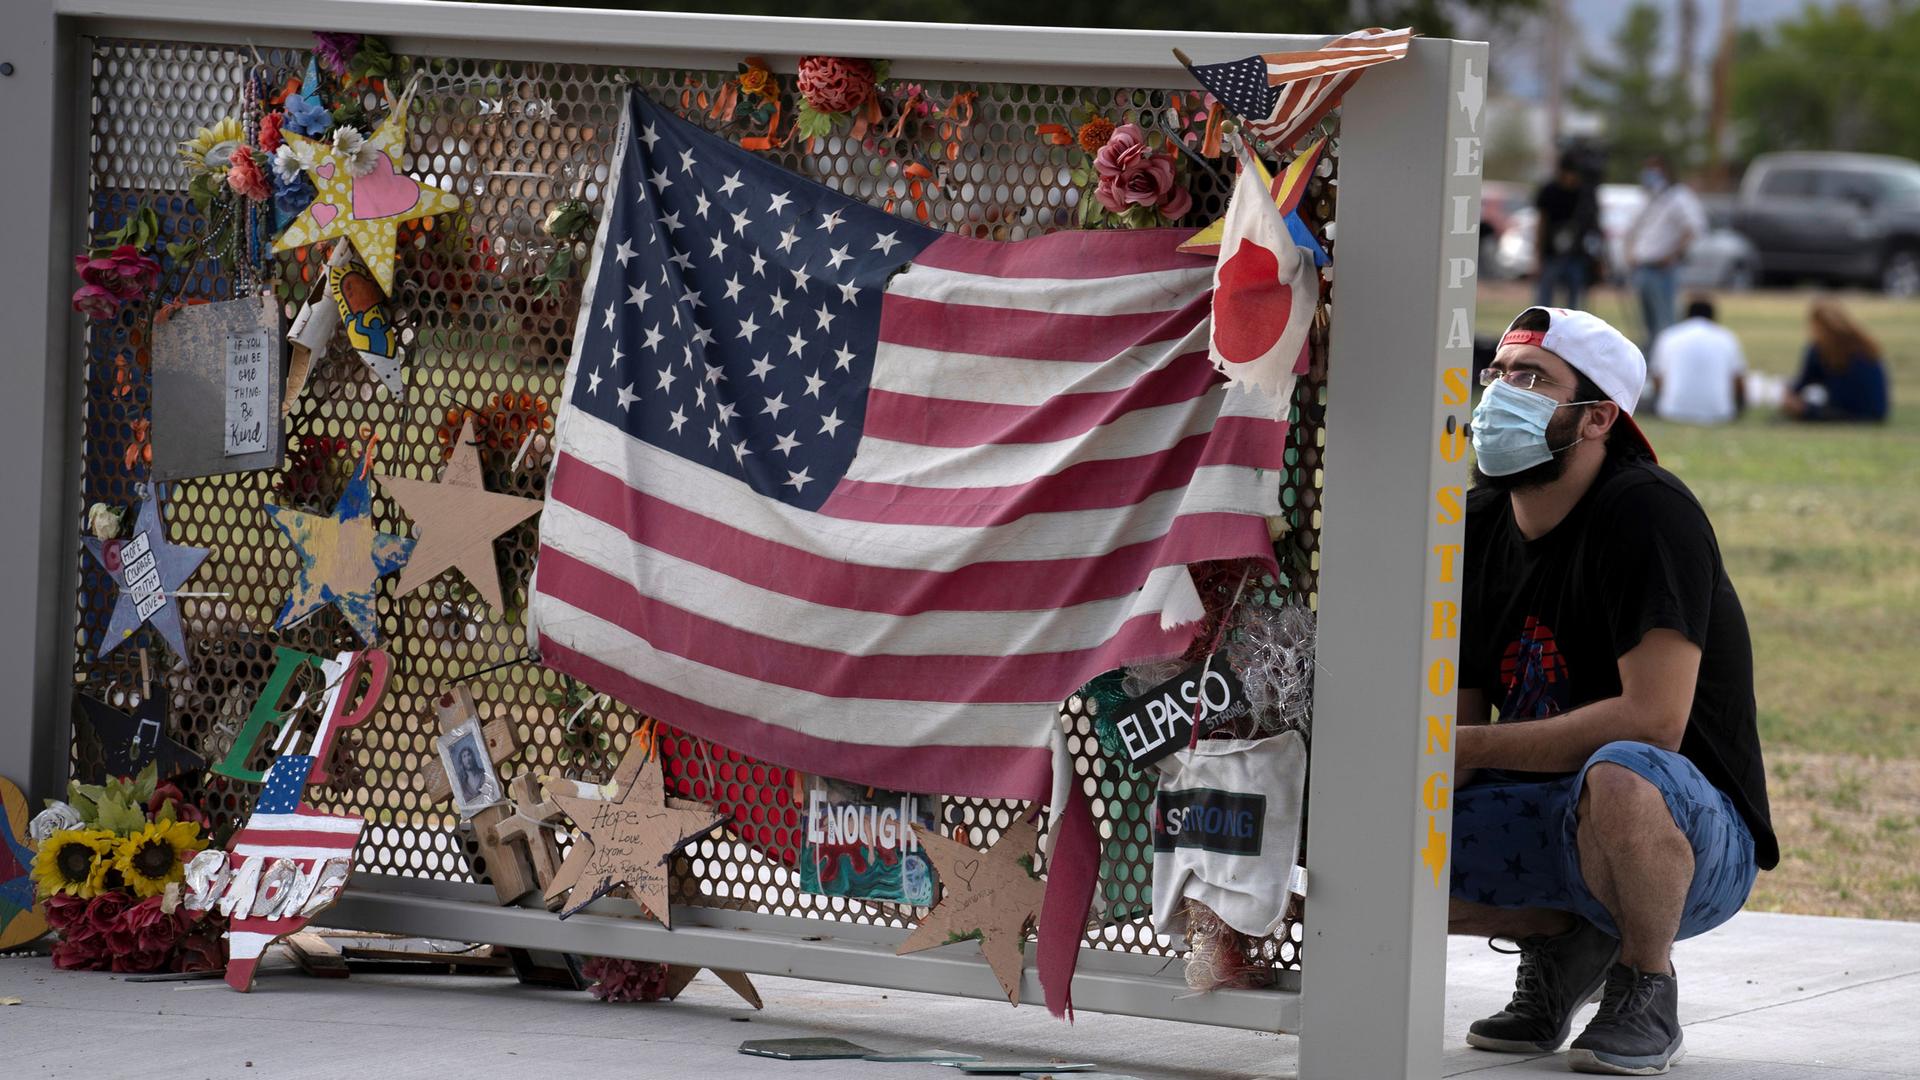 A man is shown kneeling next to a memorial that has stars and an American flag pinned on it.